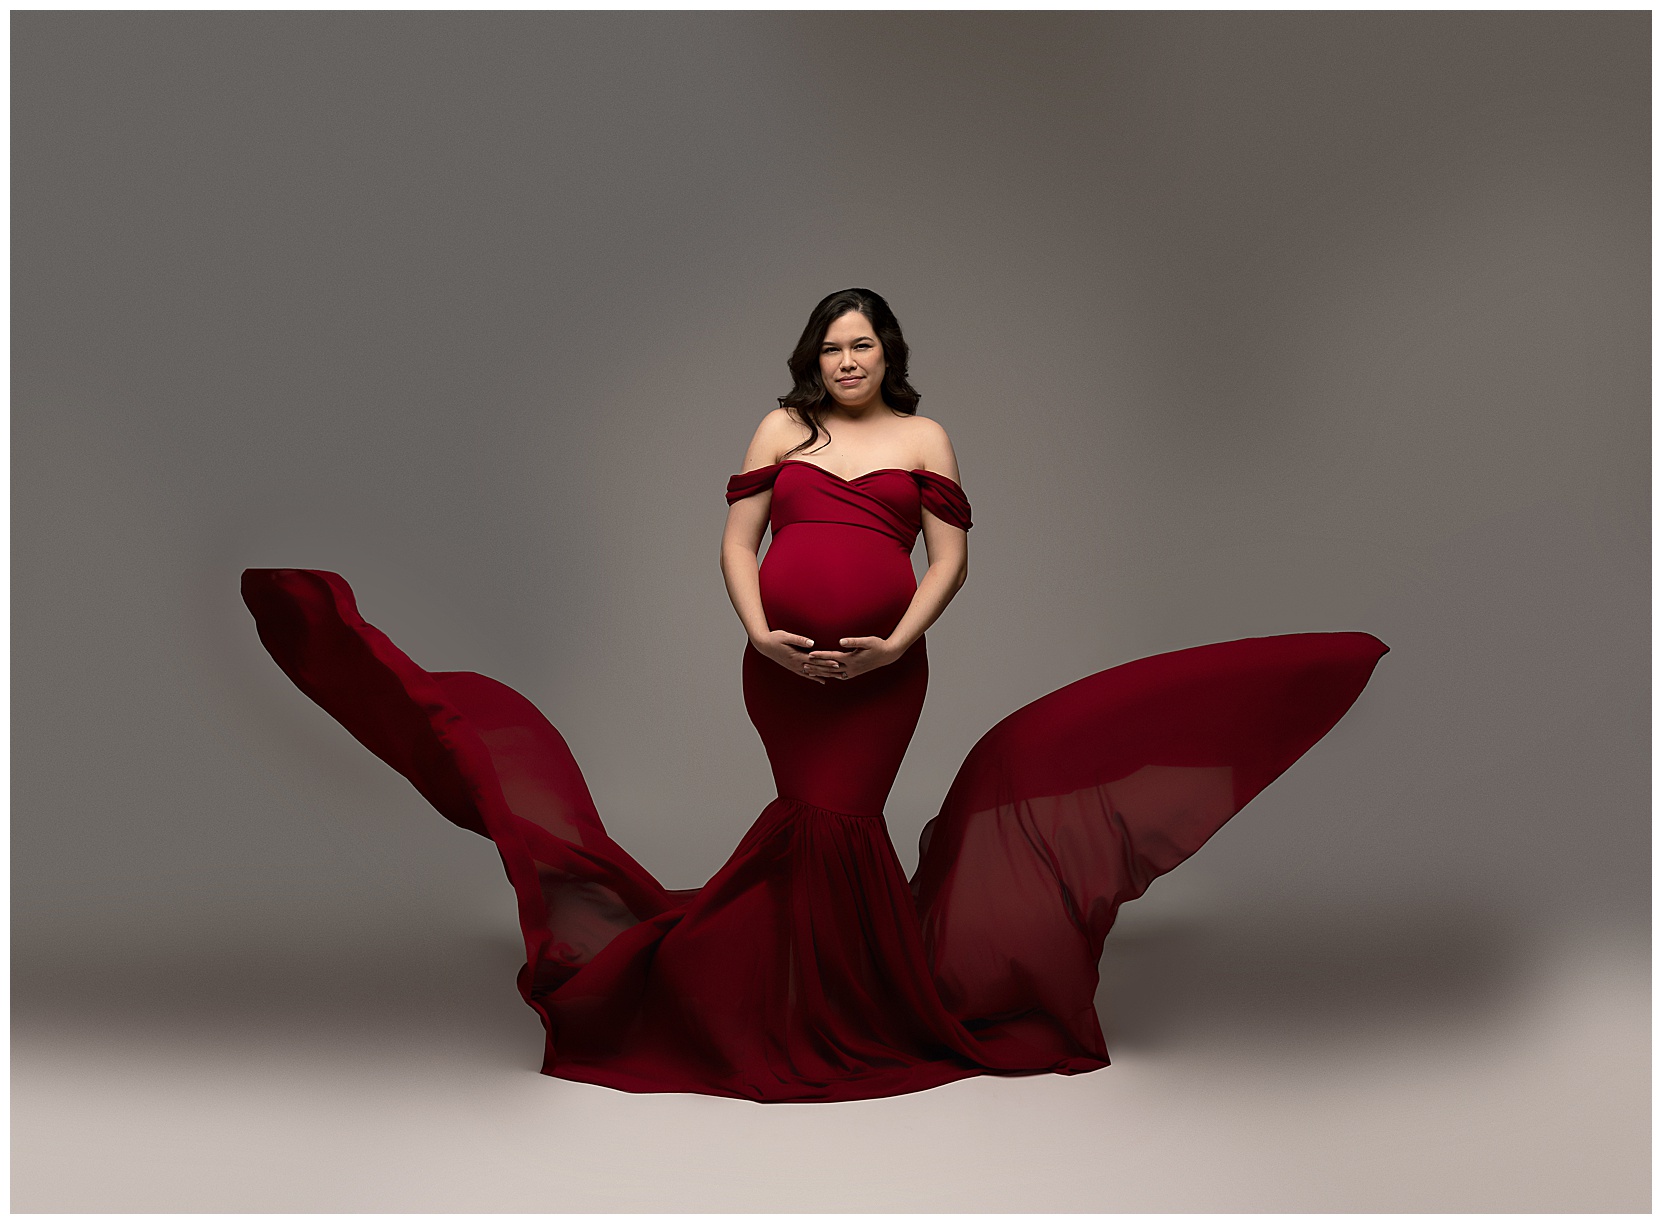 Unique maternity photo featuring a woman in a red dress cradling her belly. The train of her gown is floating on either side of her.